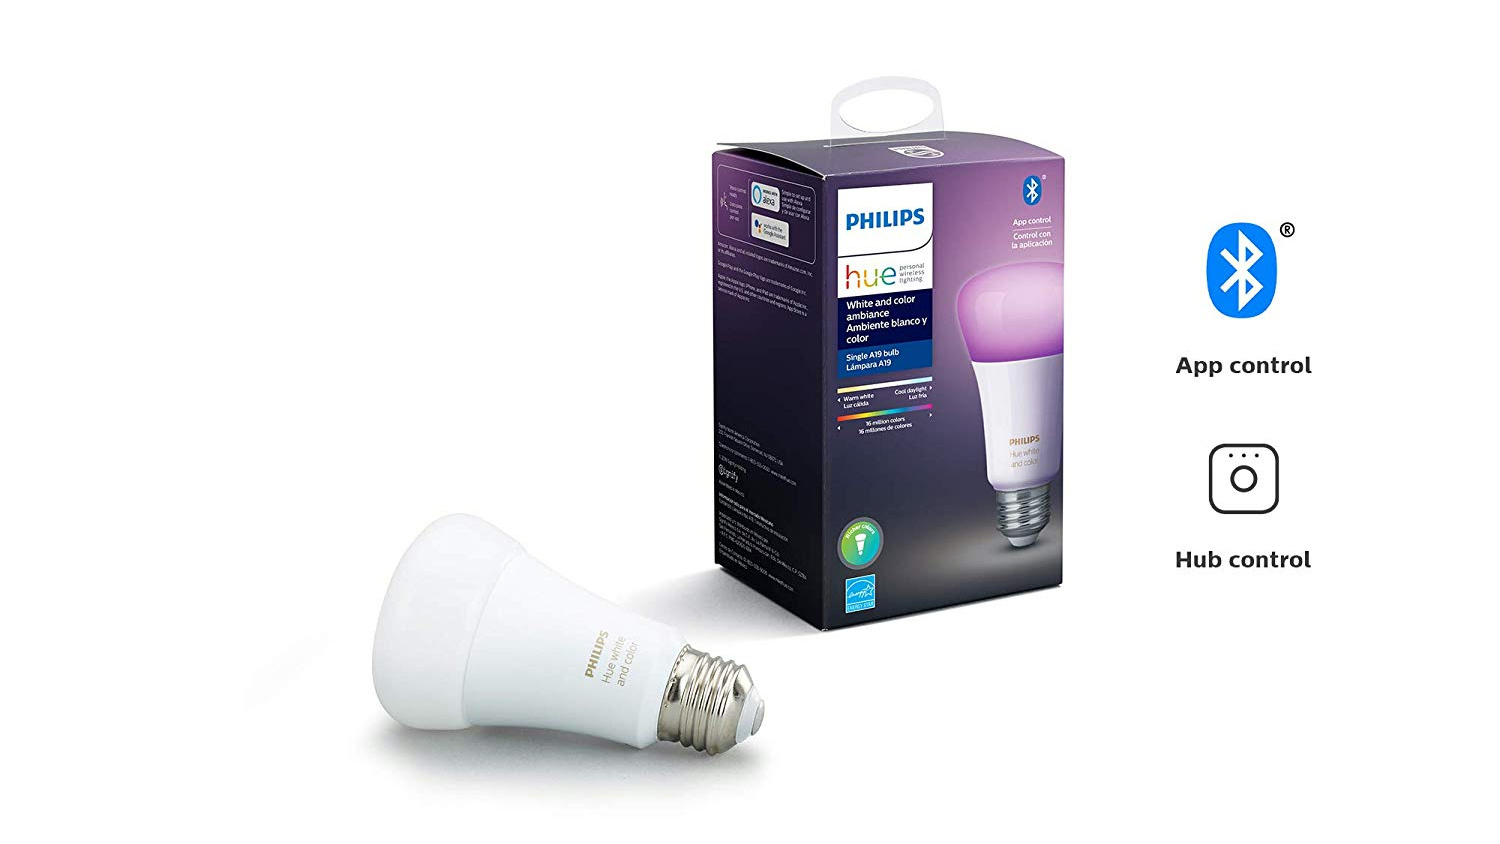 Philips Hue with Bluetooth press render